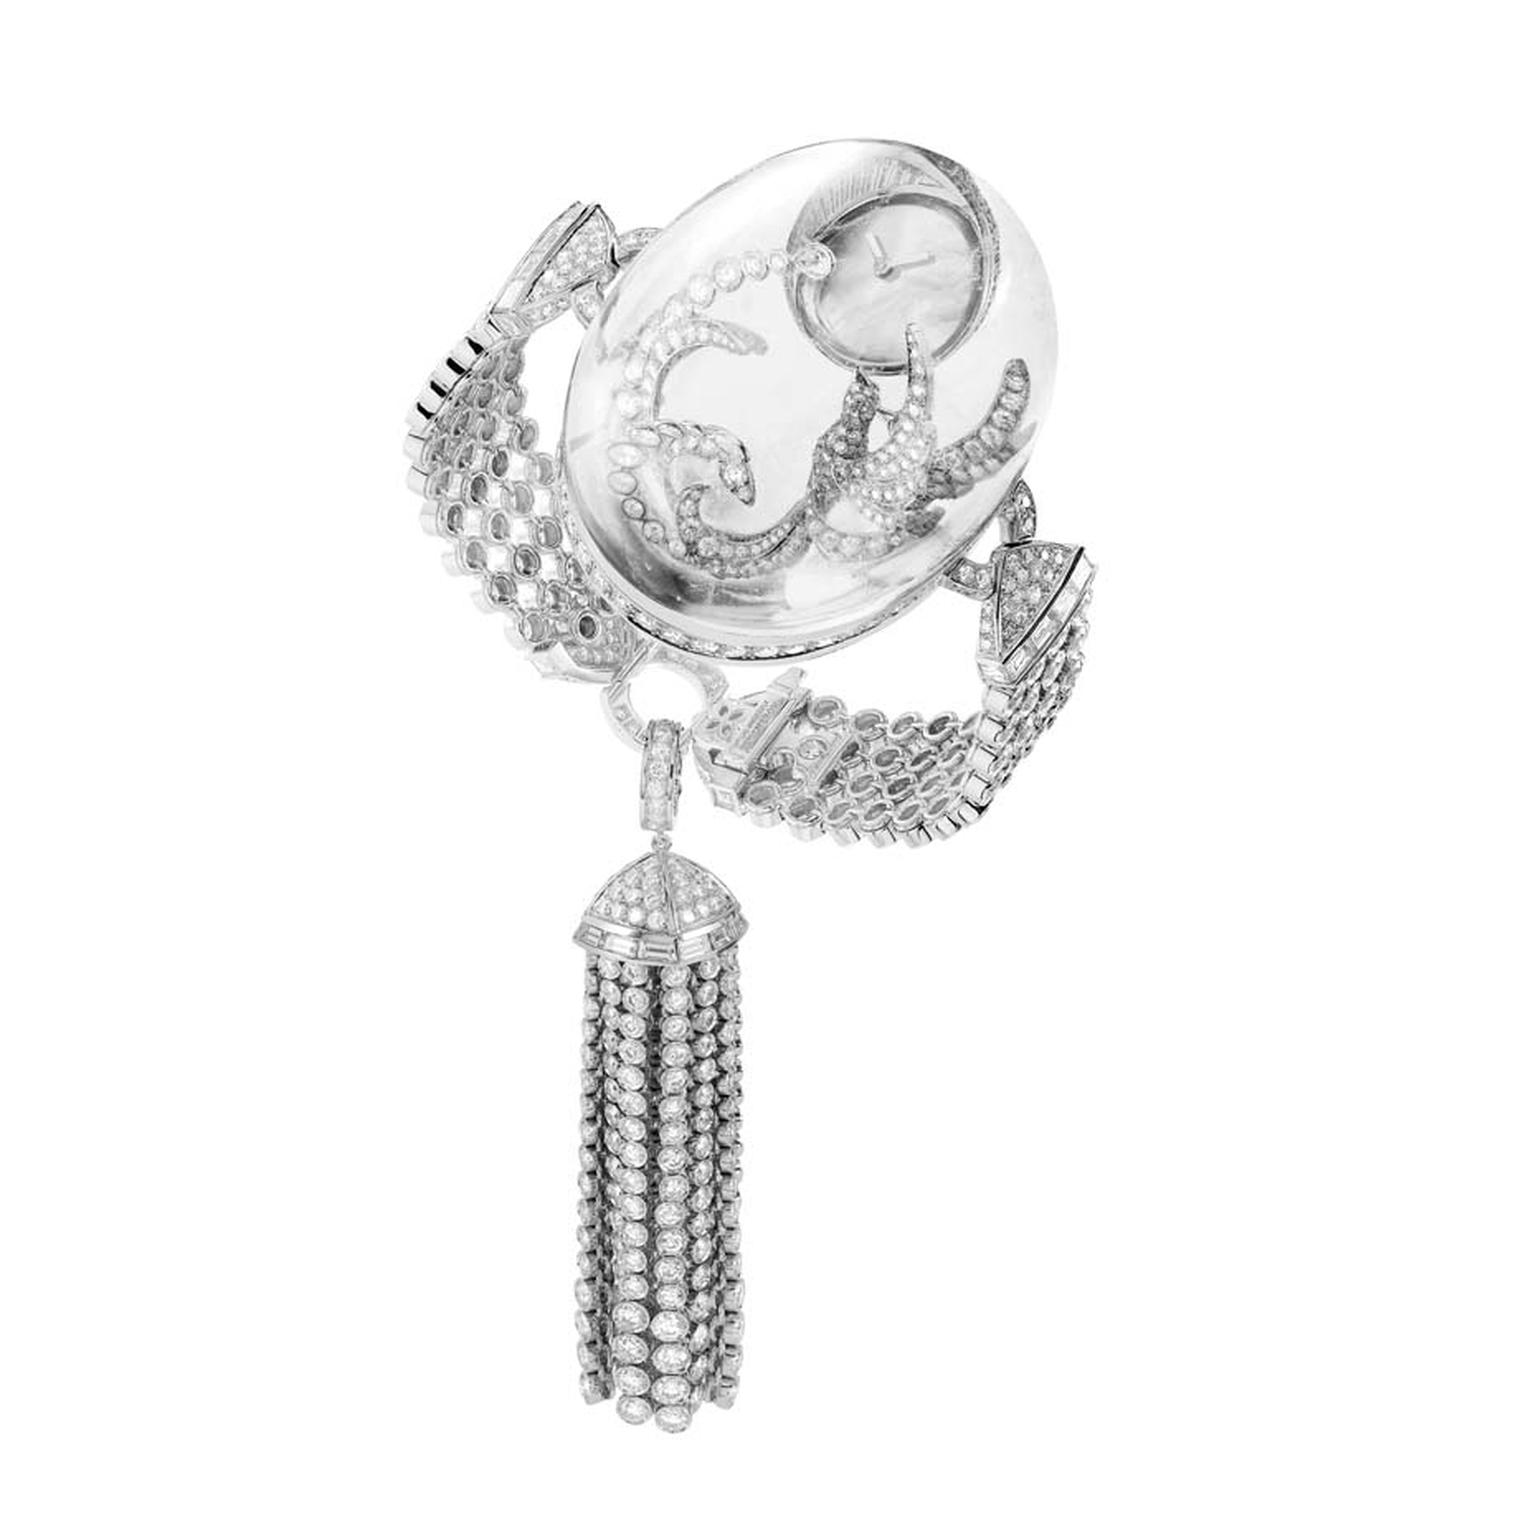 A three-dimensional rock crystal dome, carved from a solid piece of rock crystal, is a window into Boucheron's extraordinary Cristal de Lune jewellery watch, which will be appearing at the Biennale des Antiquaires in Paris this autumn.